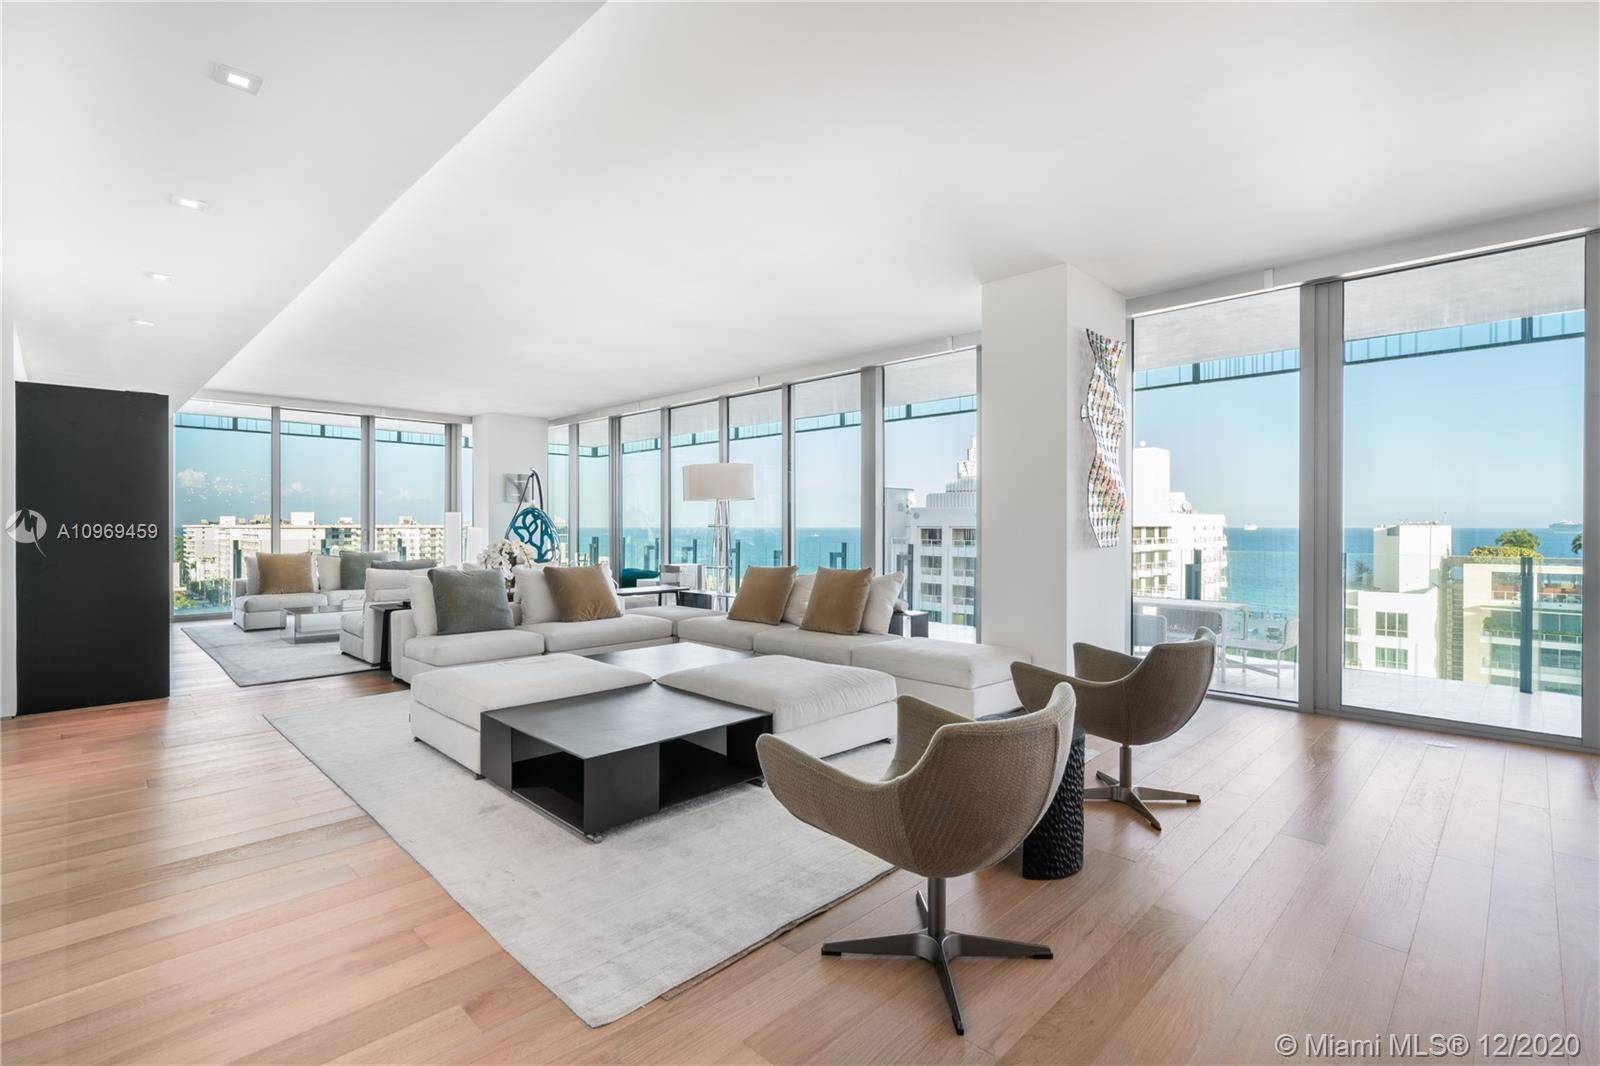 Take in sweeping ocean, South Beach, Miami City skyline views from luxurious full floor residence inside South of Fifths most significant new development, Glass !